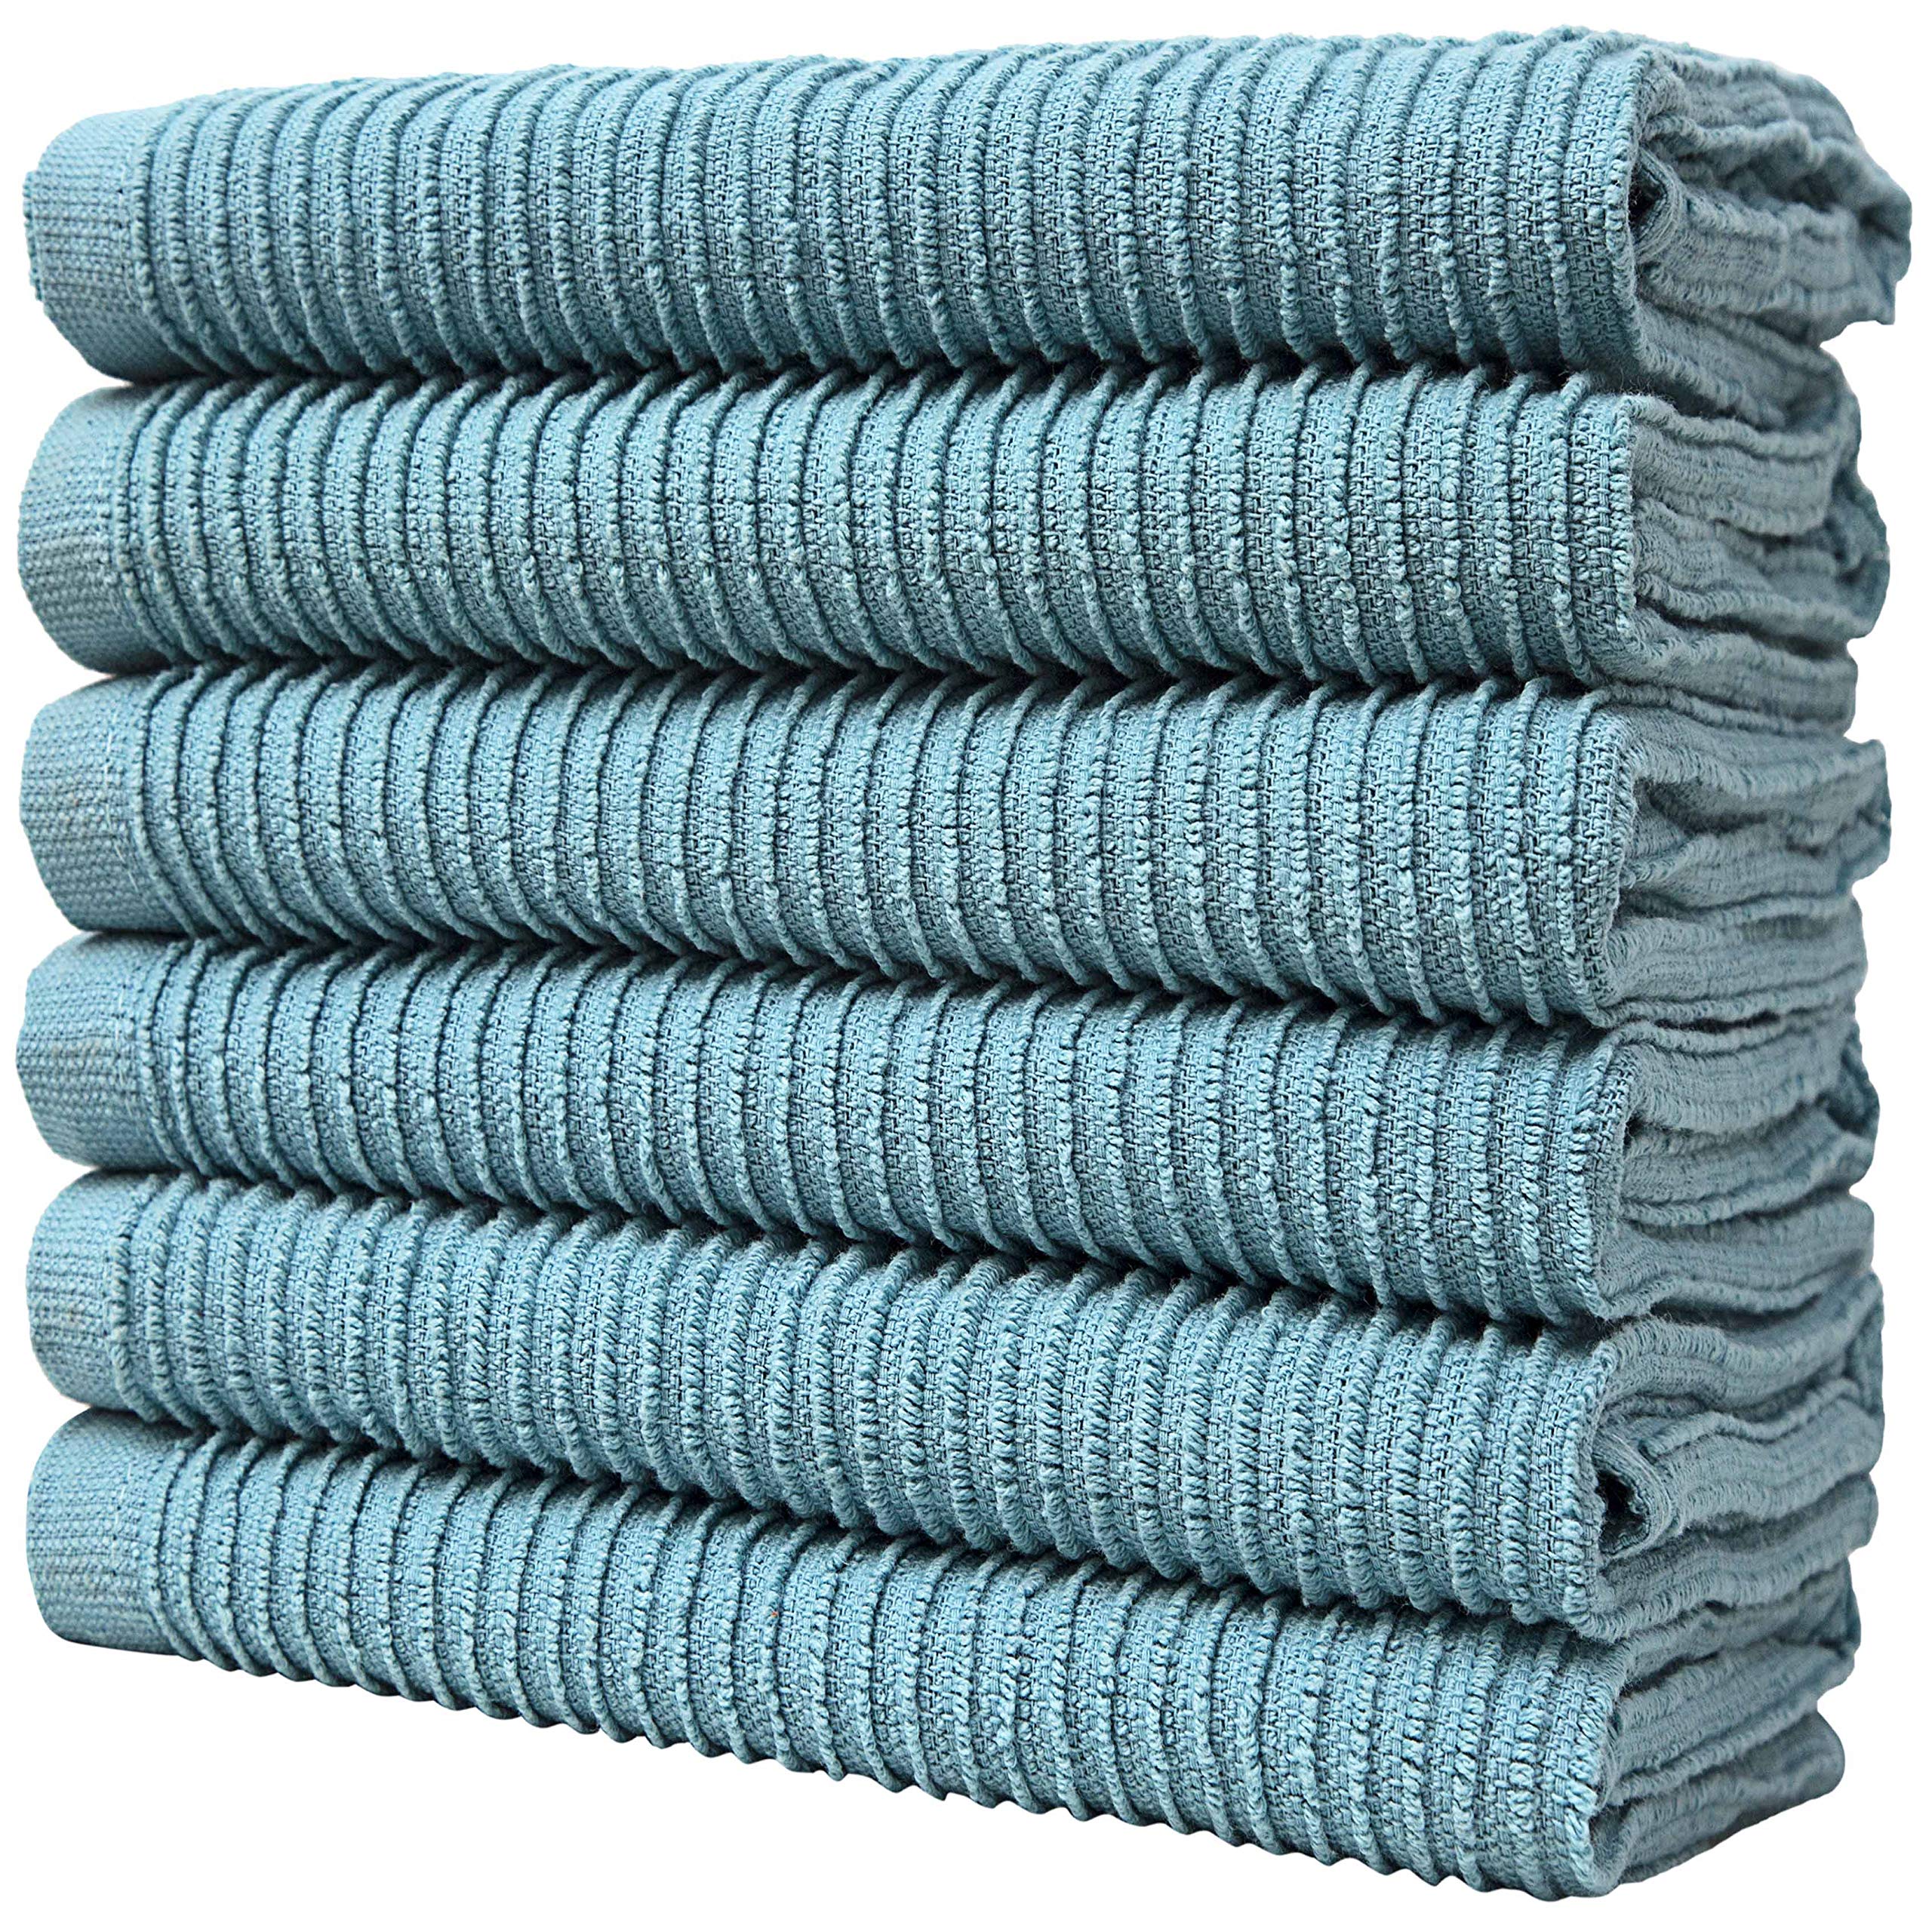 DecorRack 6 Kitchen Towels, 100% Cotton, 16 x 27 inches, White, Navy Blue  and Teal, 6 Pieces 